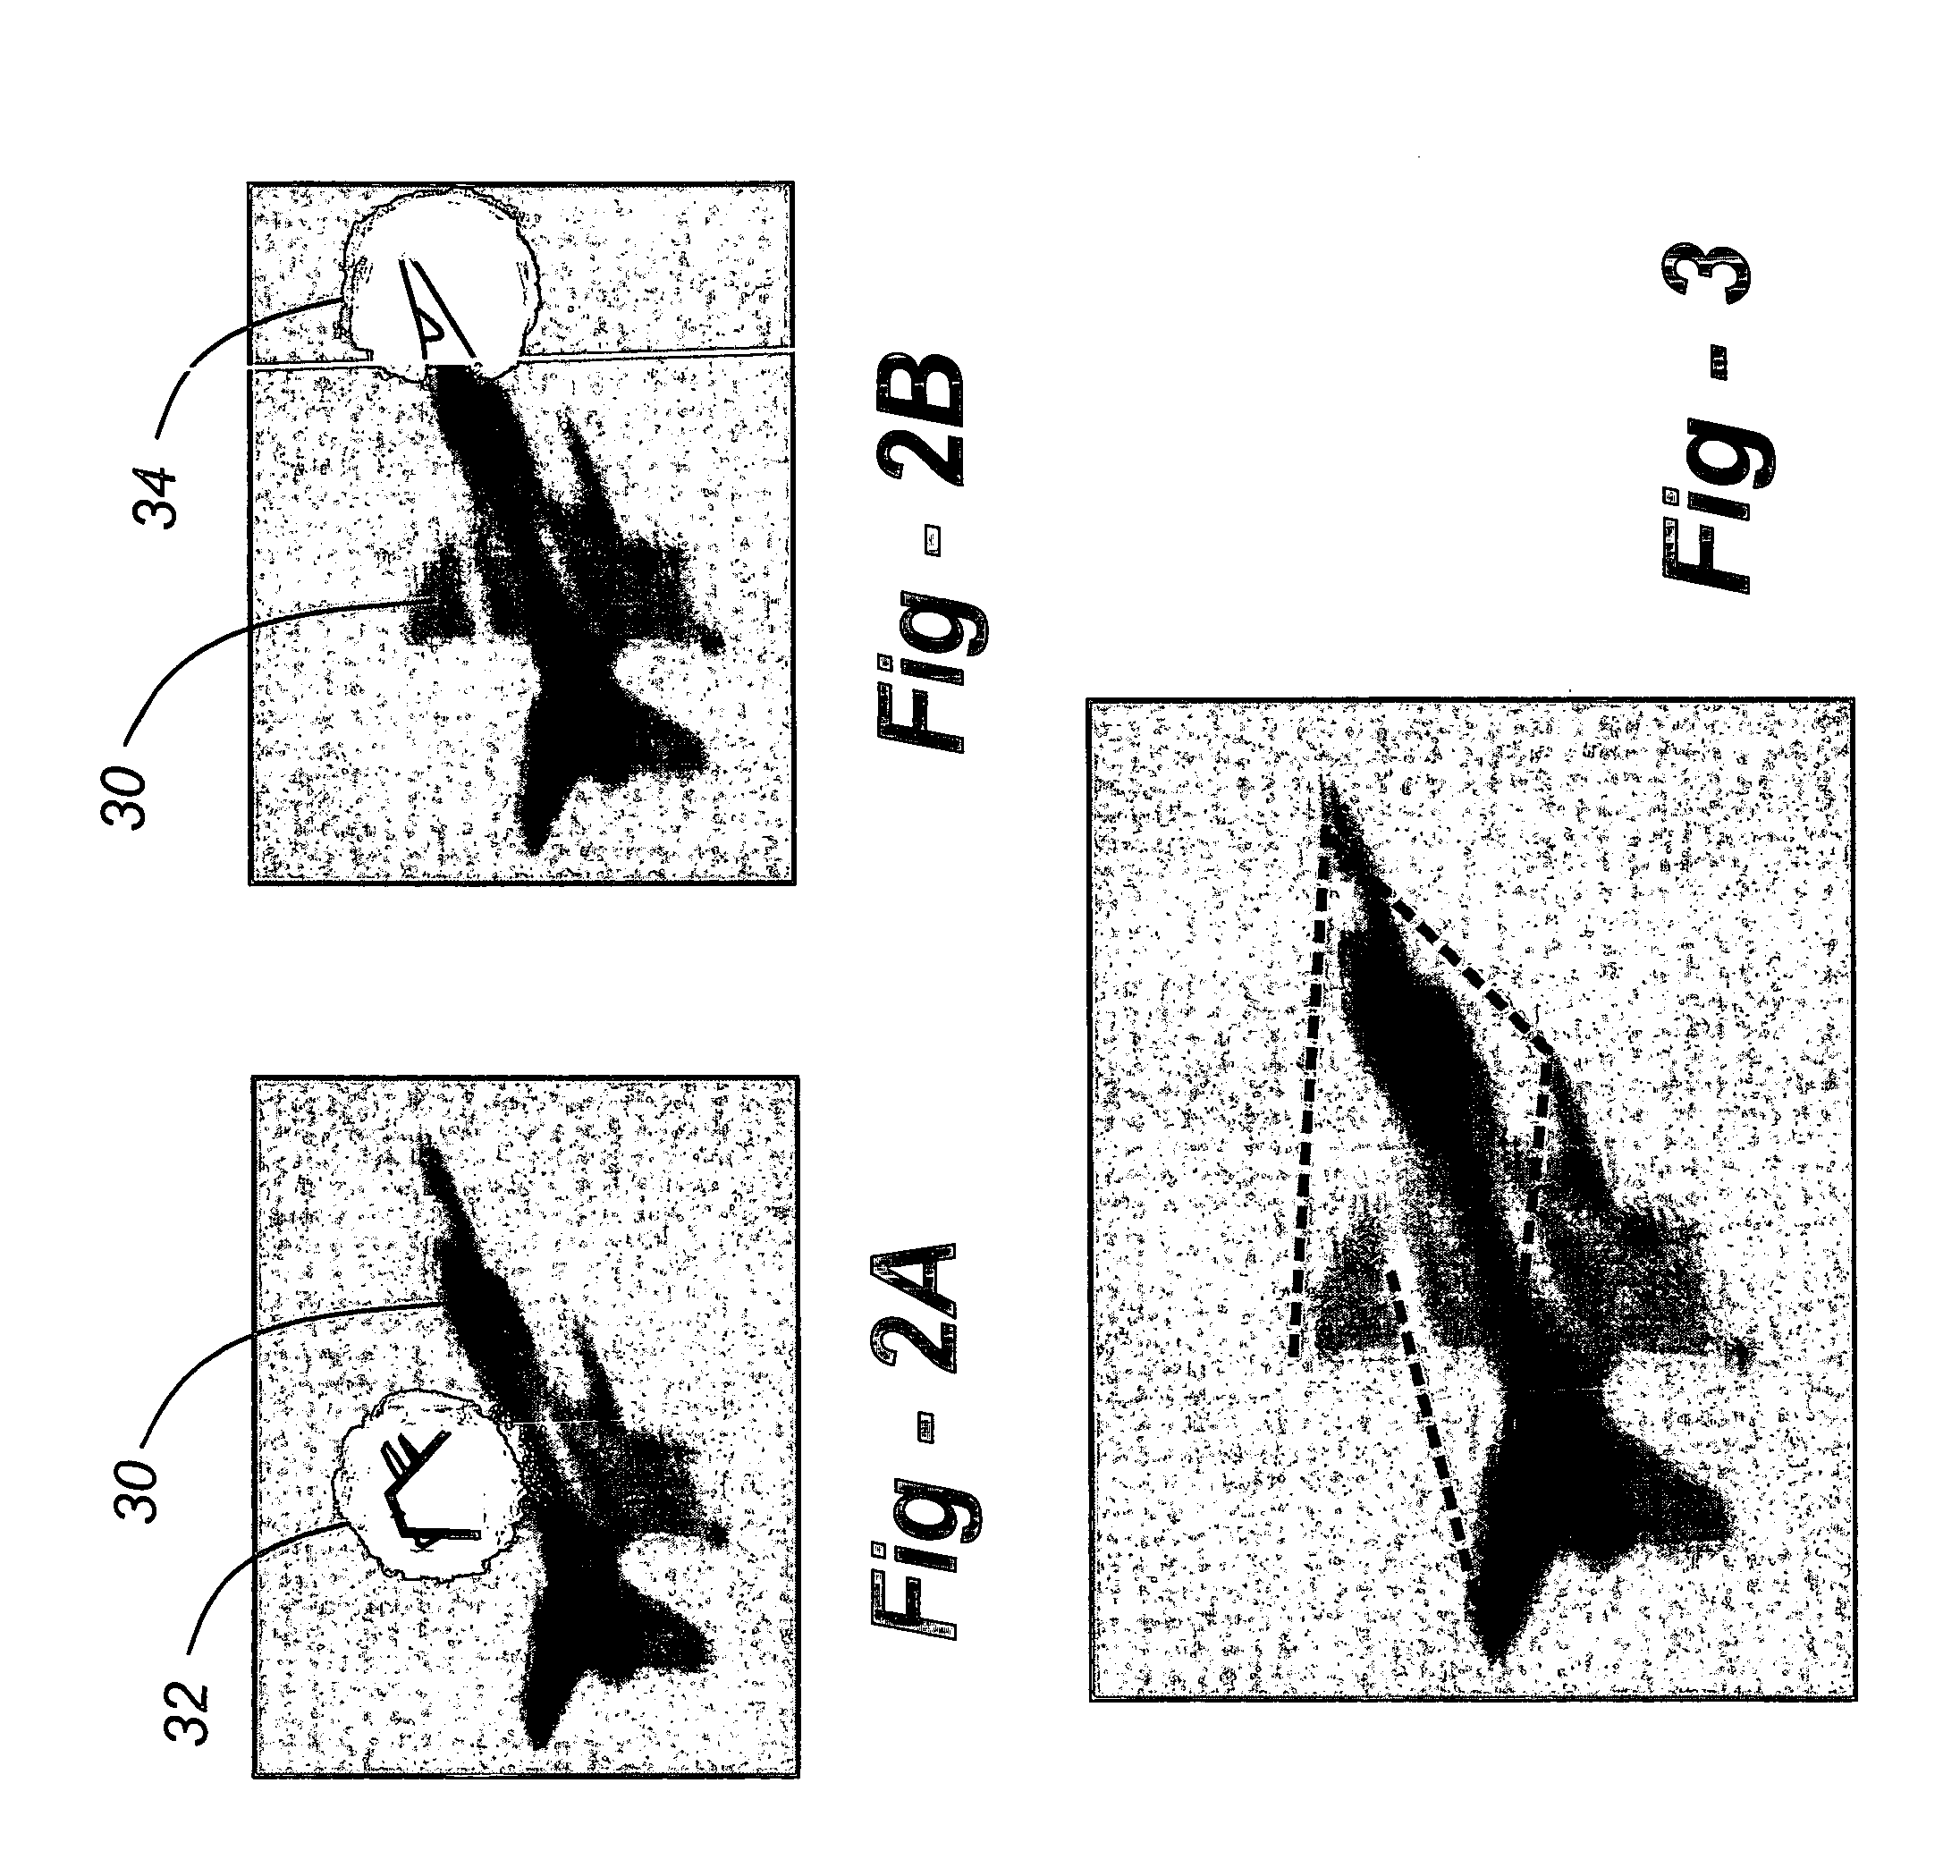 Foveated display eye-tracking system and method